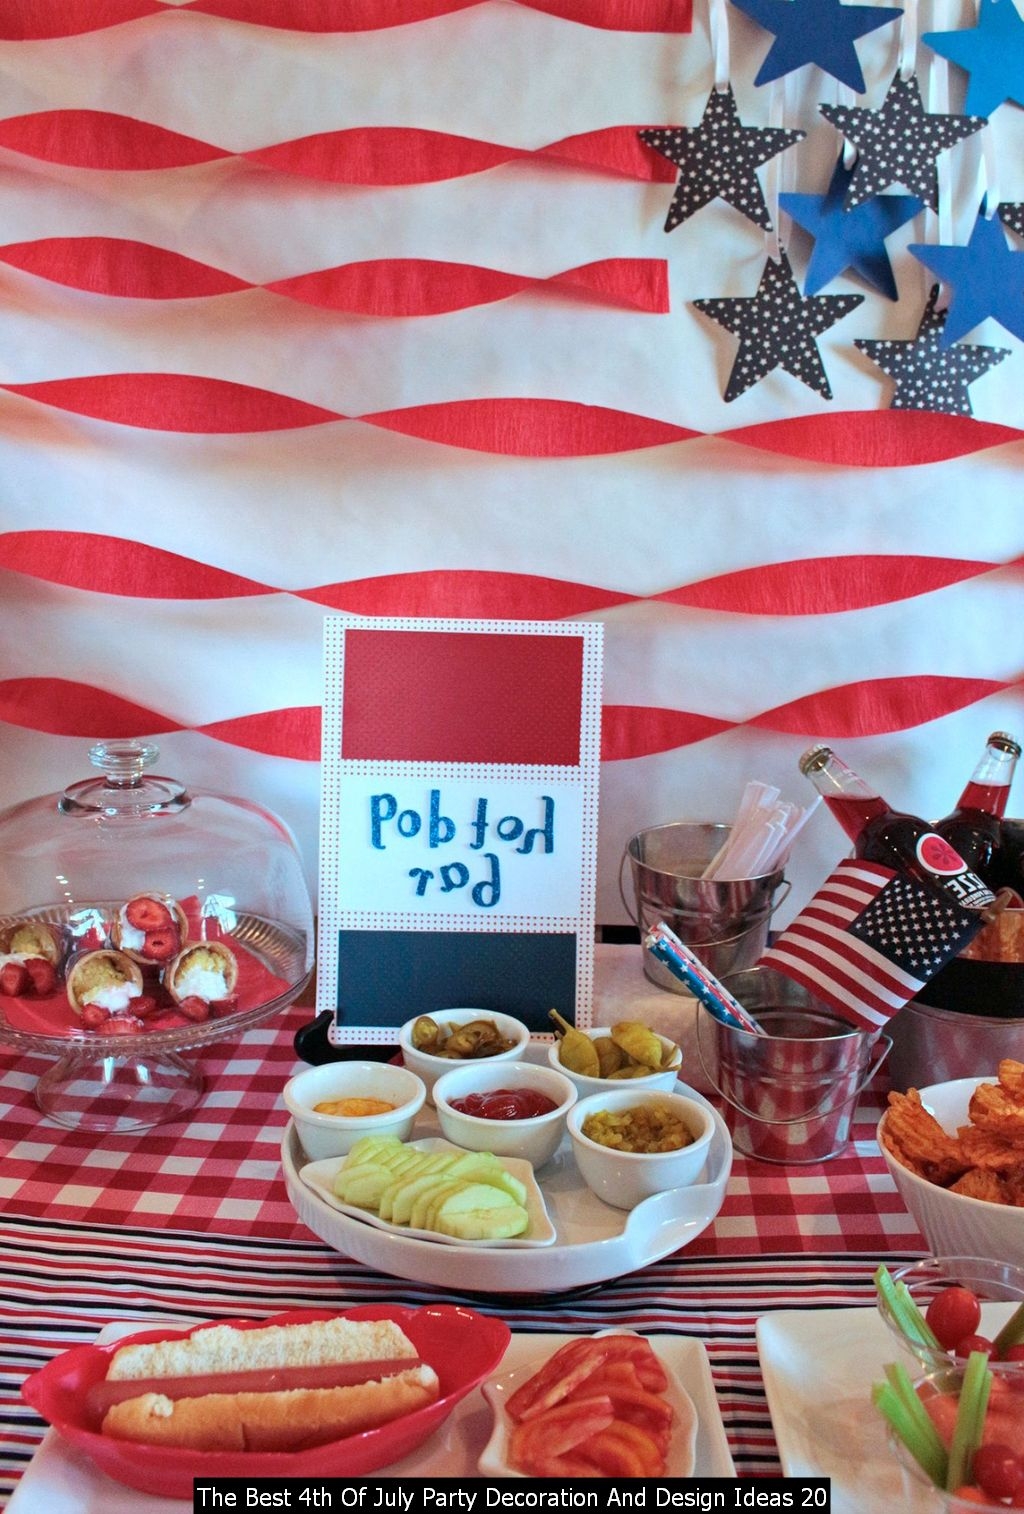 The Best 4th Of July Party Decoration And Design Ideas 20